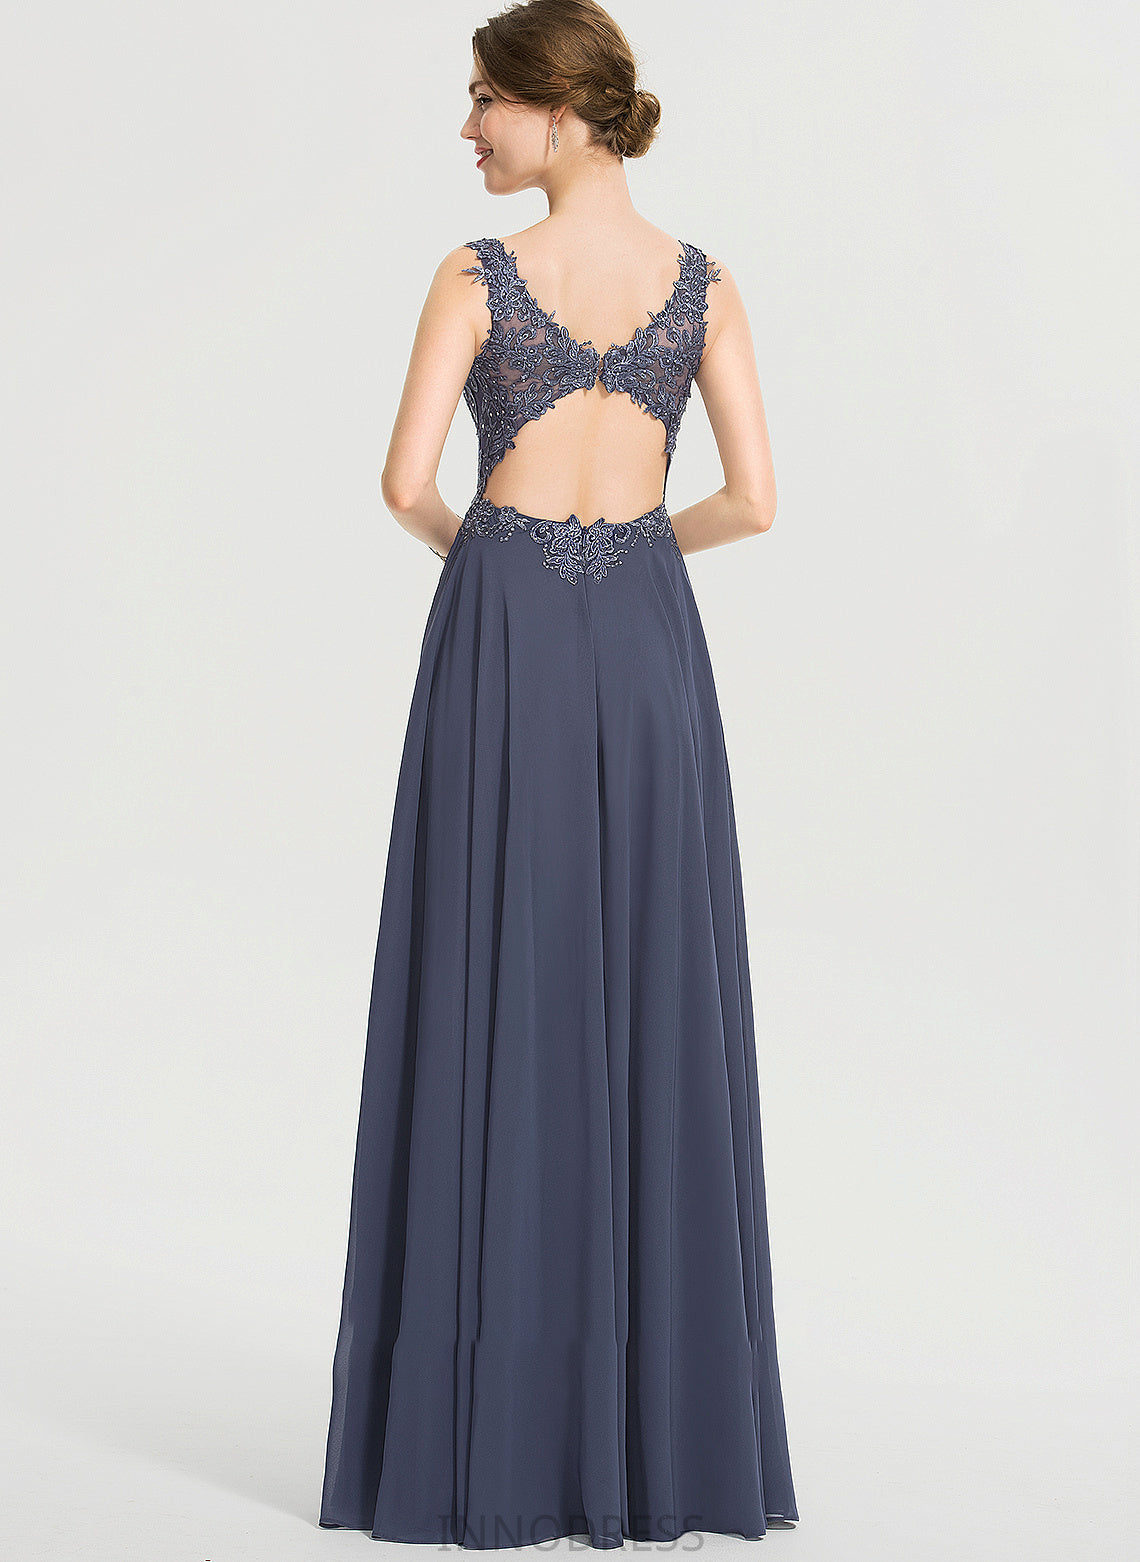 Anika A-Line Beading Front Chiffon Prom Dresses With Sequins Floor-Length Split V-neck